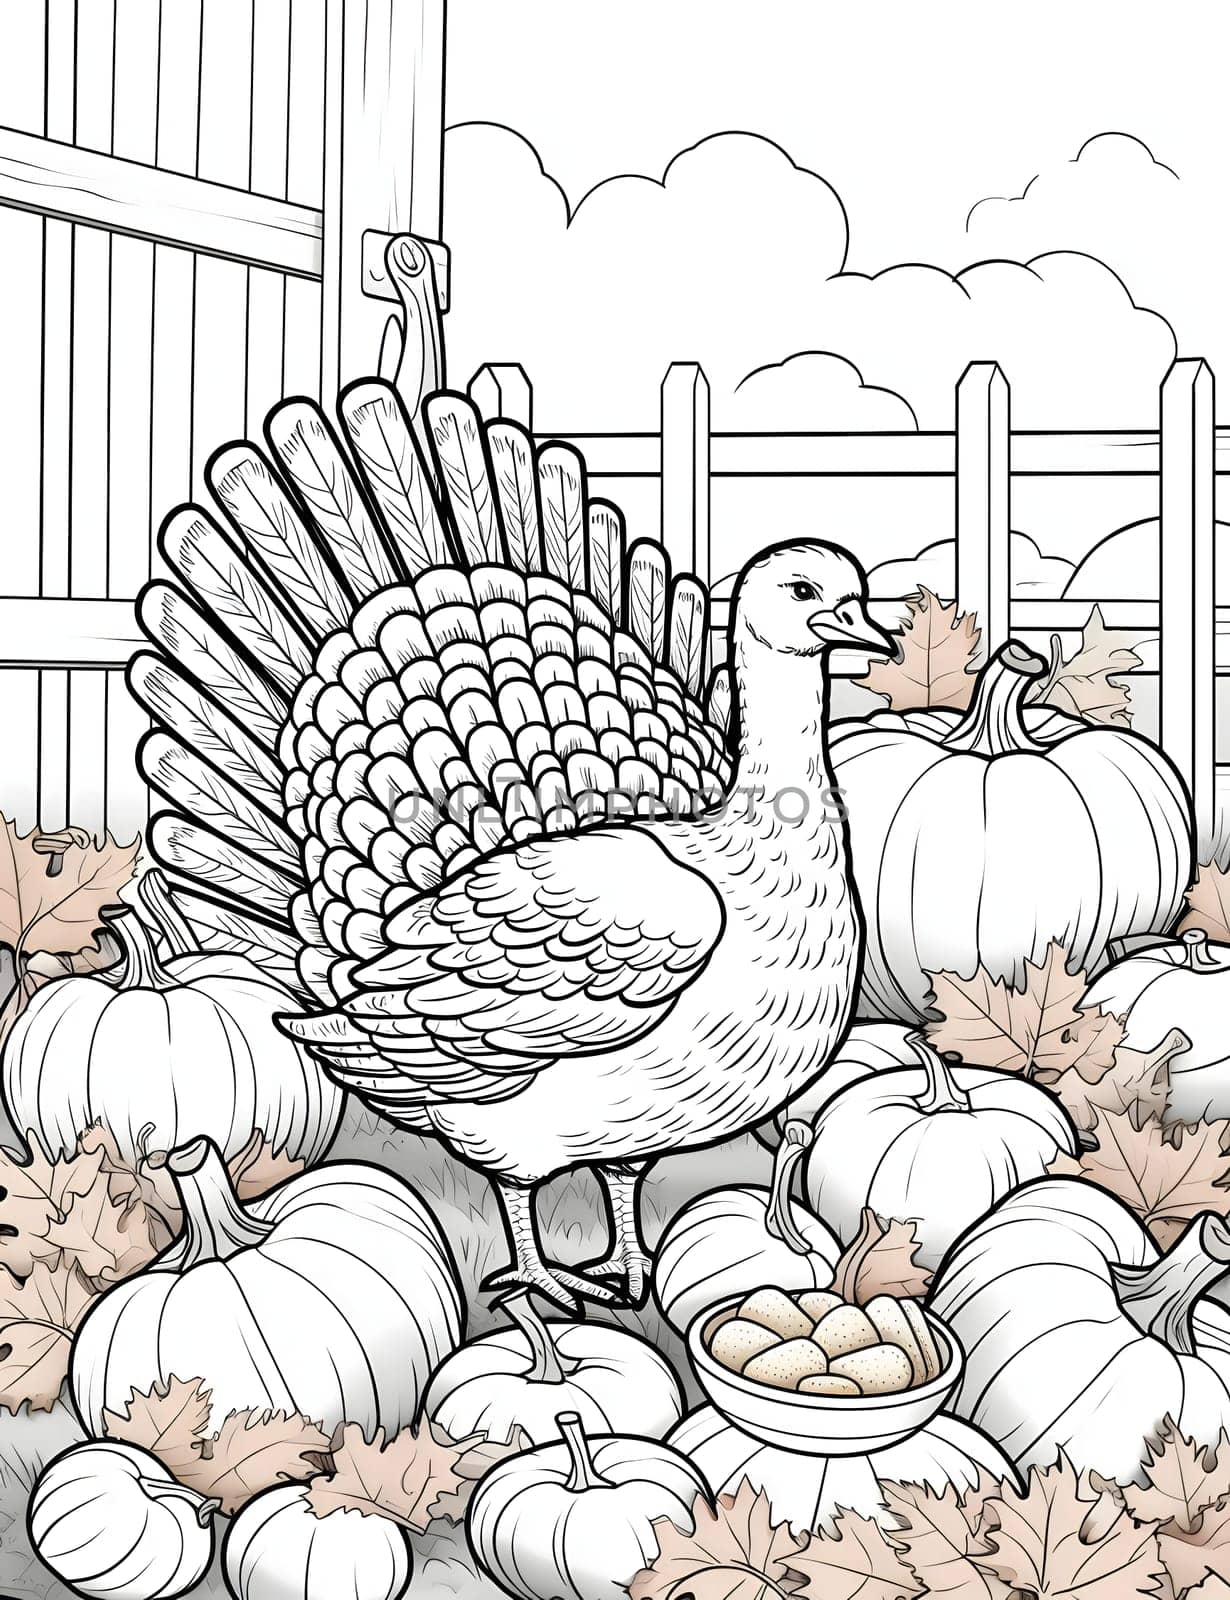 Black and White coloring book young turkey around pumpkin farm leaves. Turkey as the main dish of thanksgiving for the harvest. by ThemesS